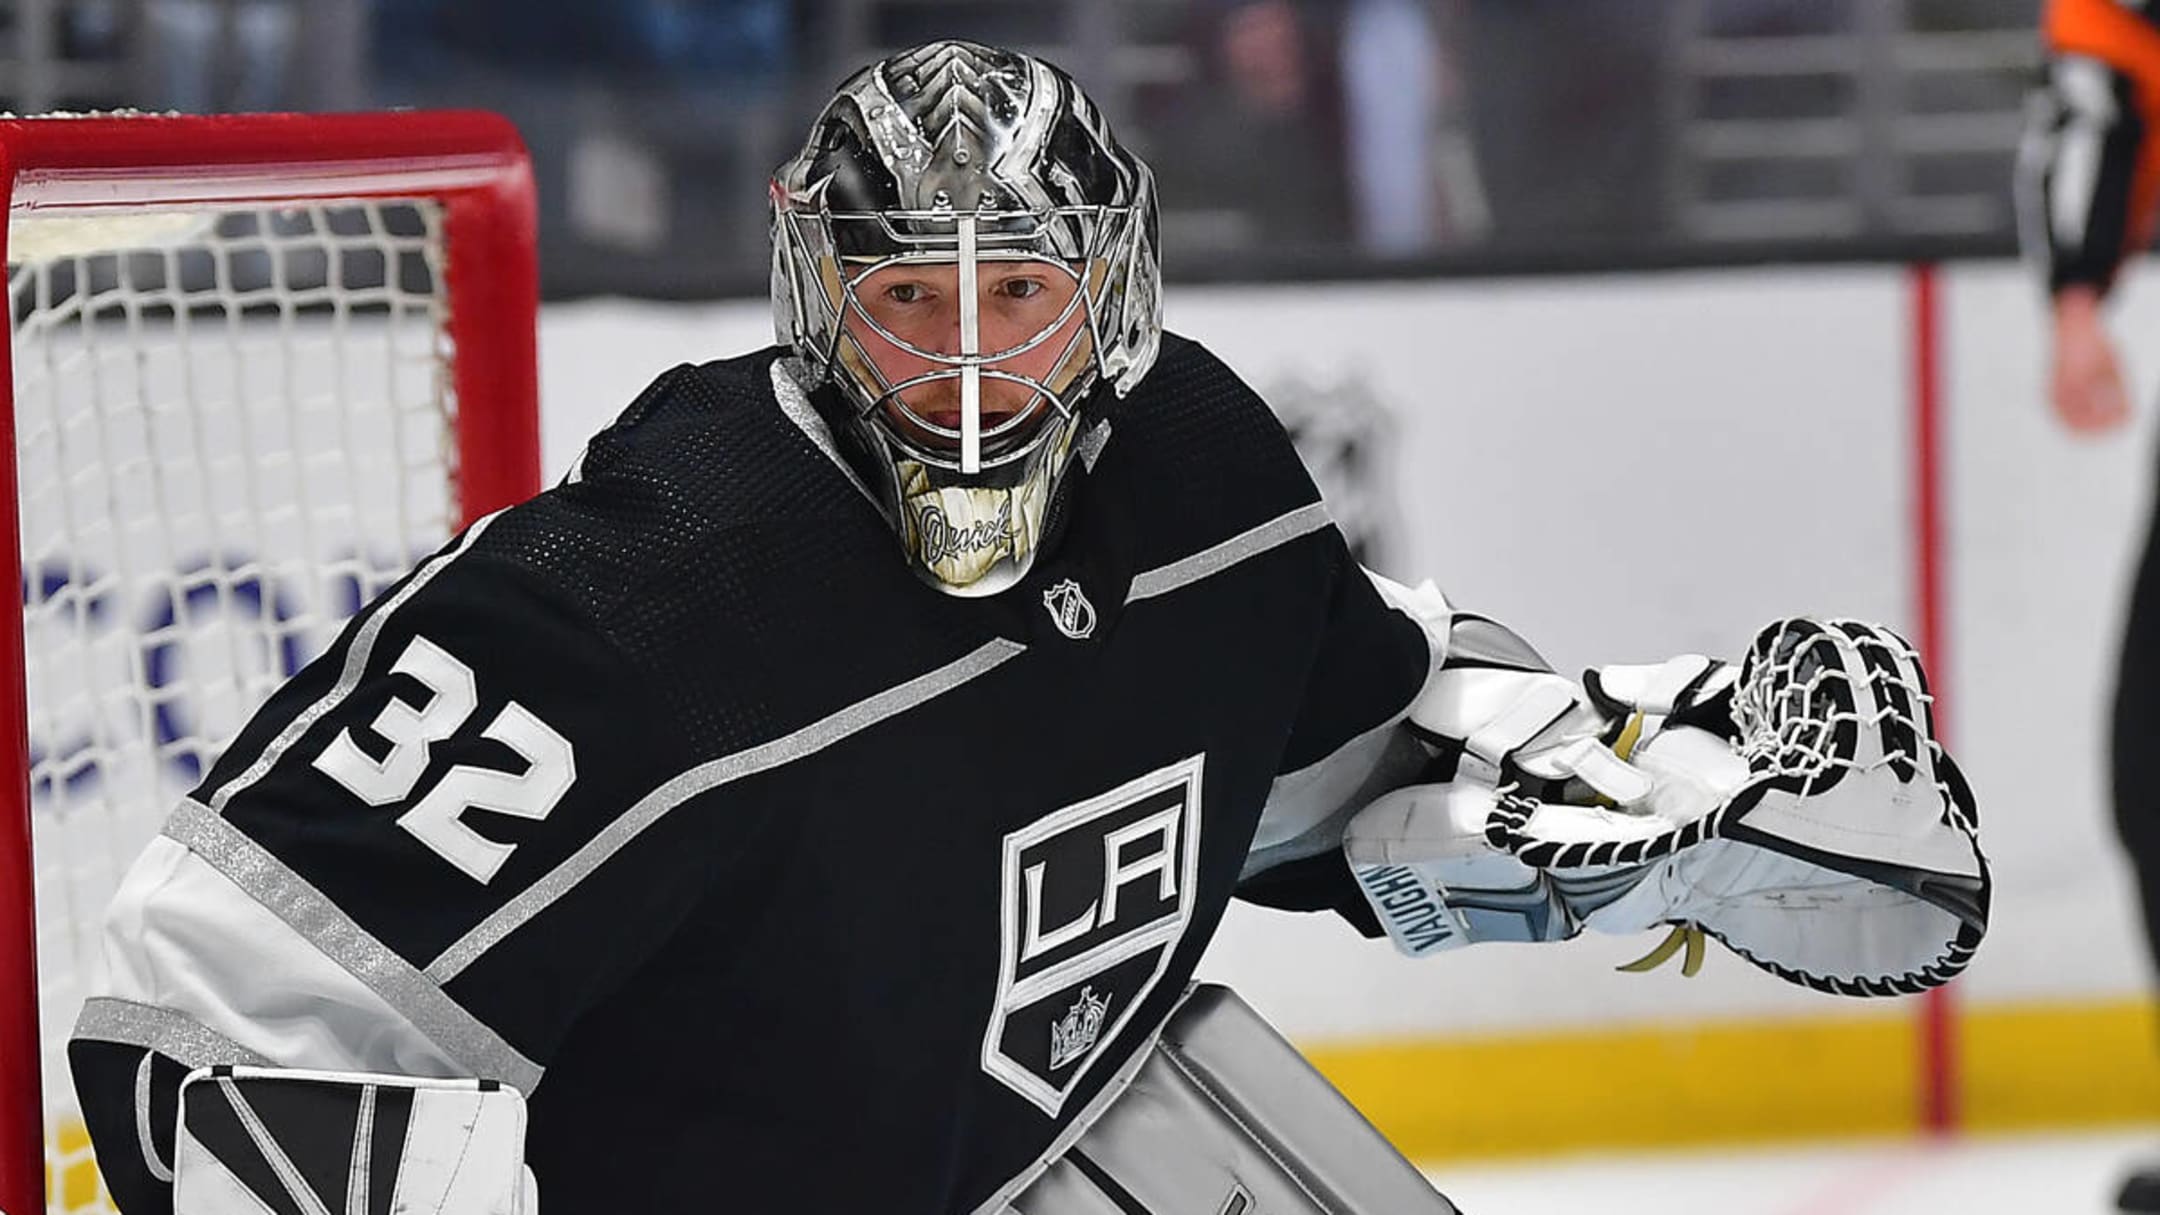 Kings trade Jonathan Quick, who led team to two Stanley Cup titles